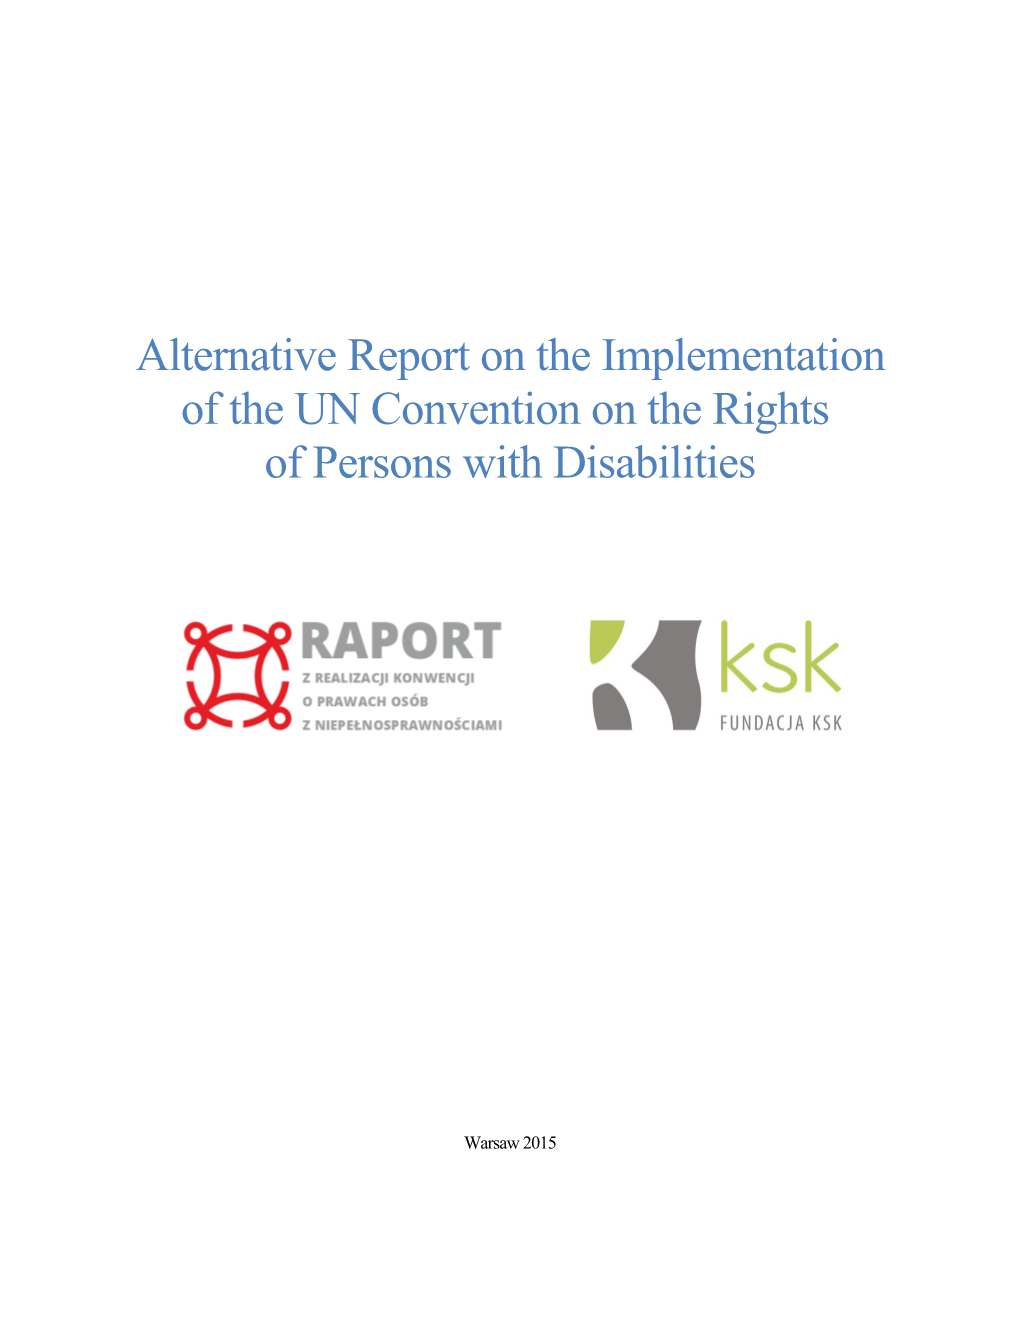 Alternative Report on the Implementation of the UN Convention on the Rights of Persons